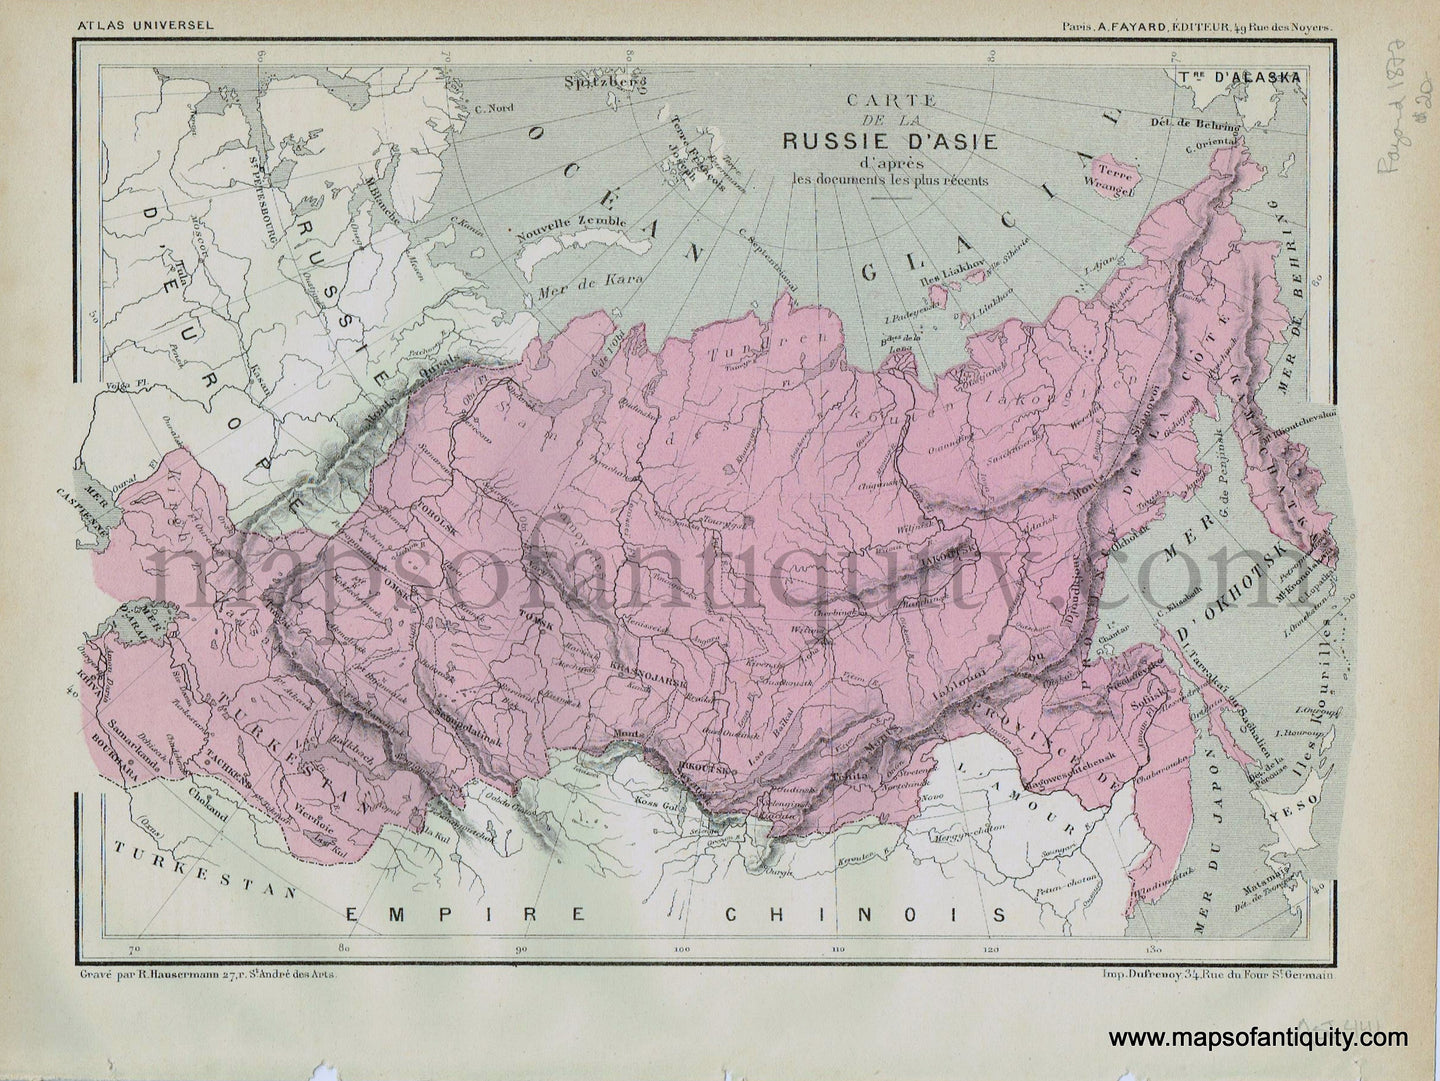 Antique-Printed-Color-Map-Asia-Carte-de-la-Russie-d'Asie---Russia-in-Asia-1877-Fayard--1800s-19th-century-Maps-of-Antiquity